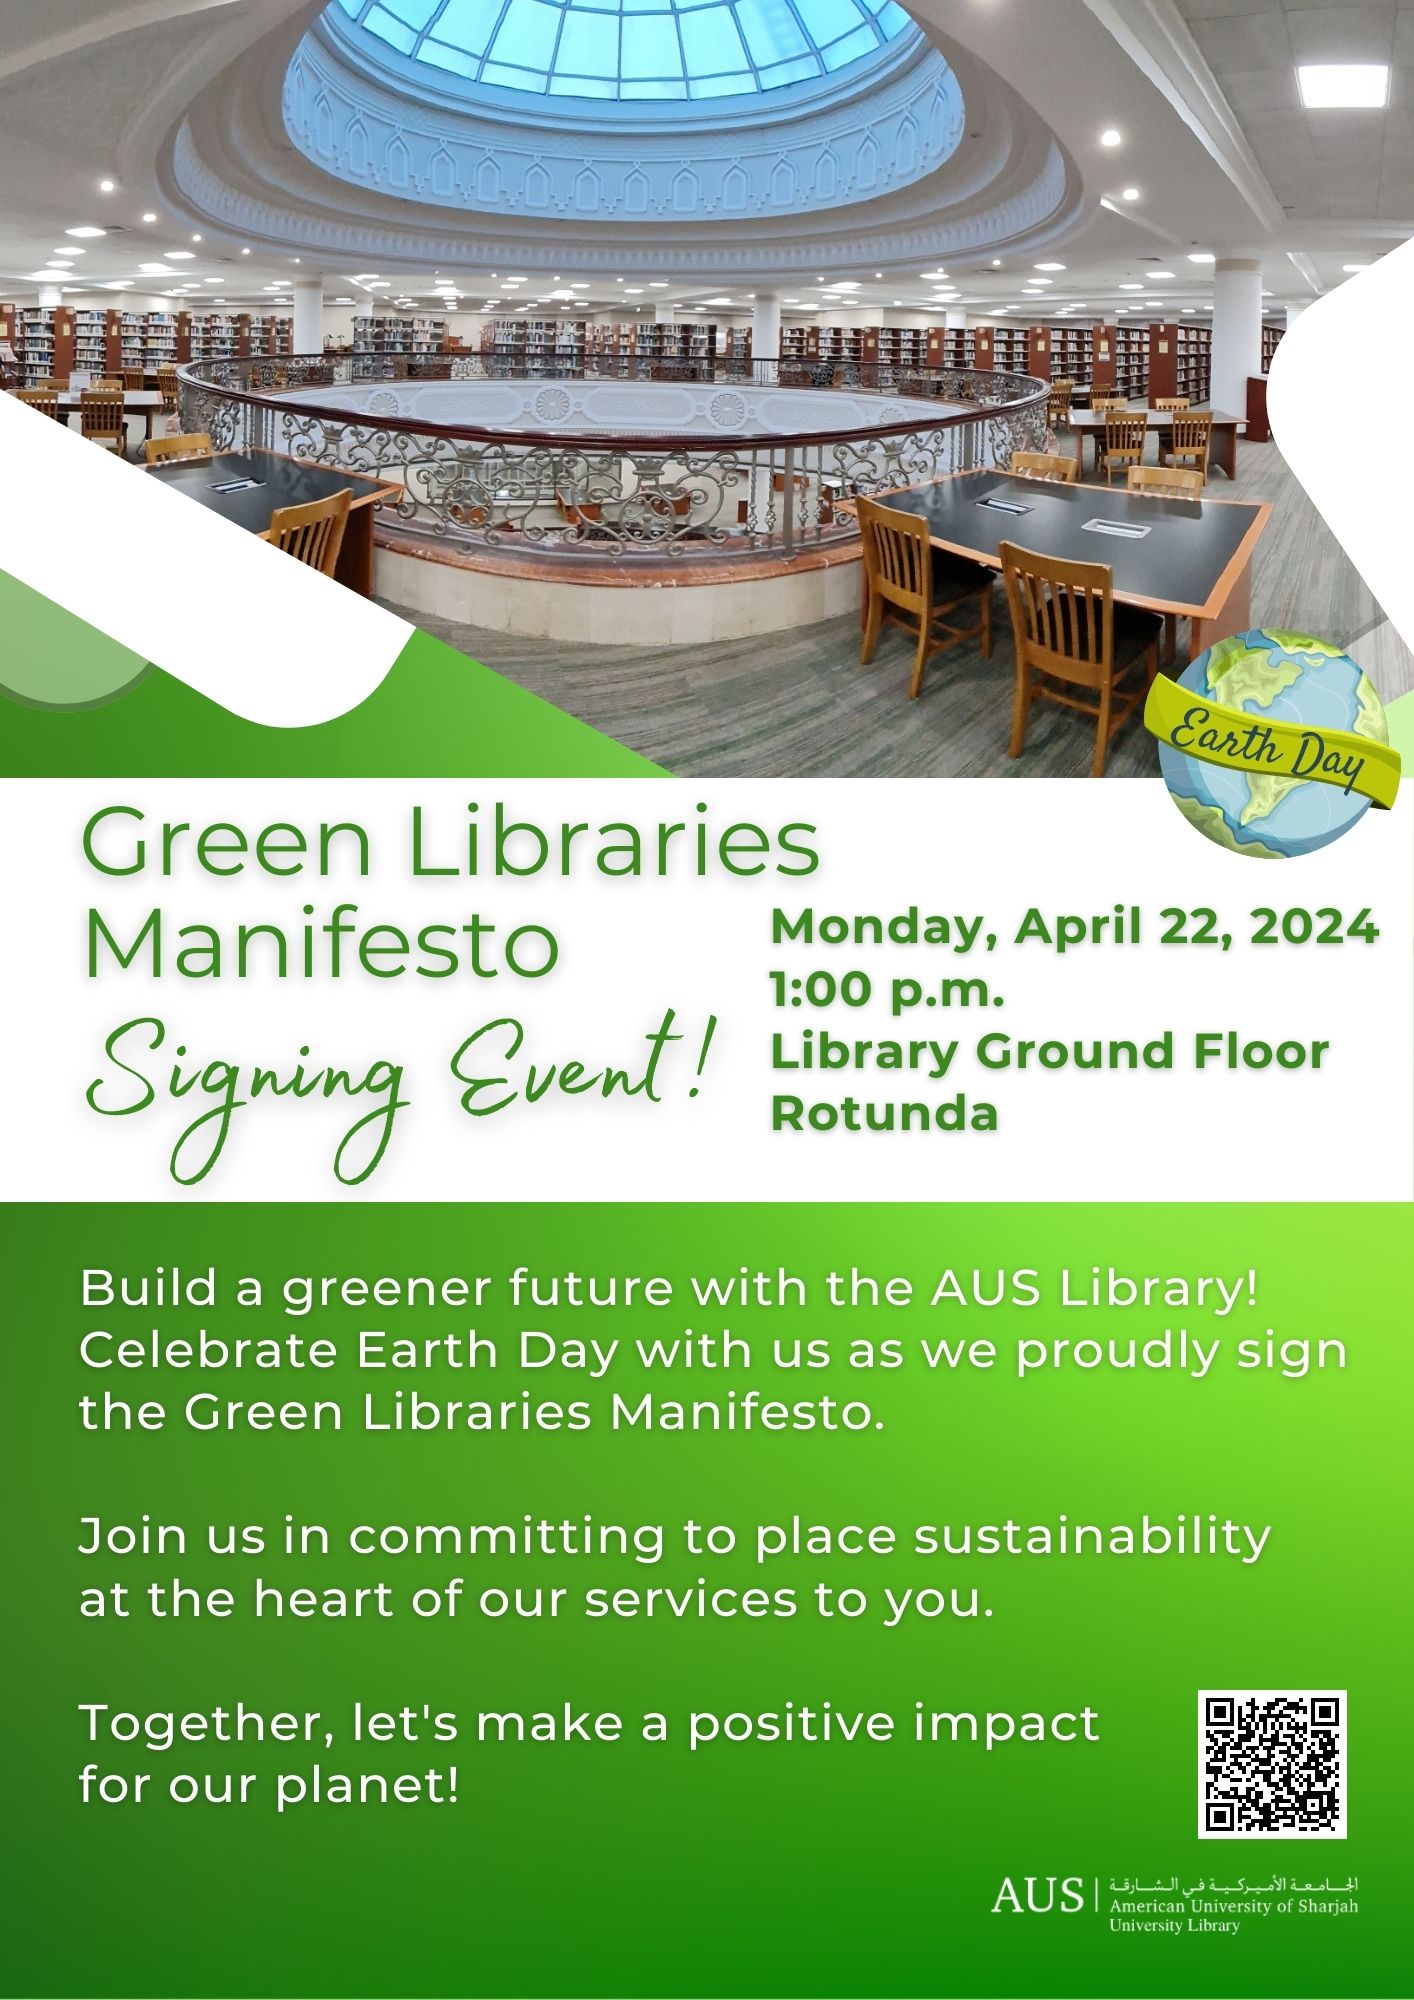 Signing Event: Green Libraries Manifesto